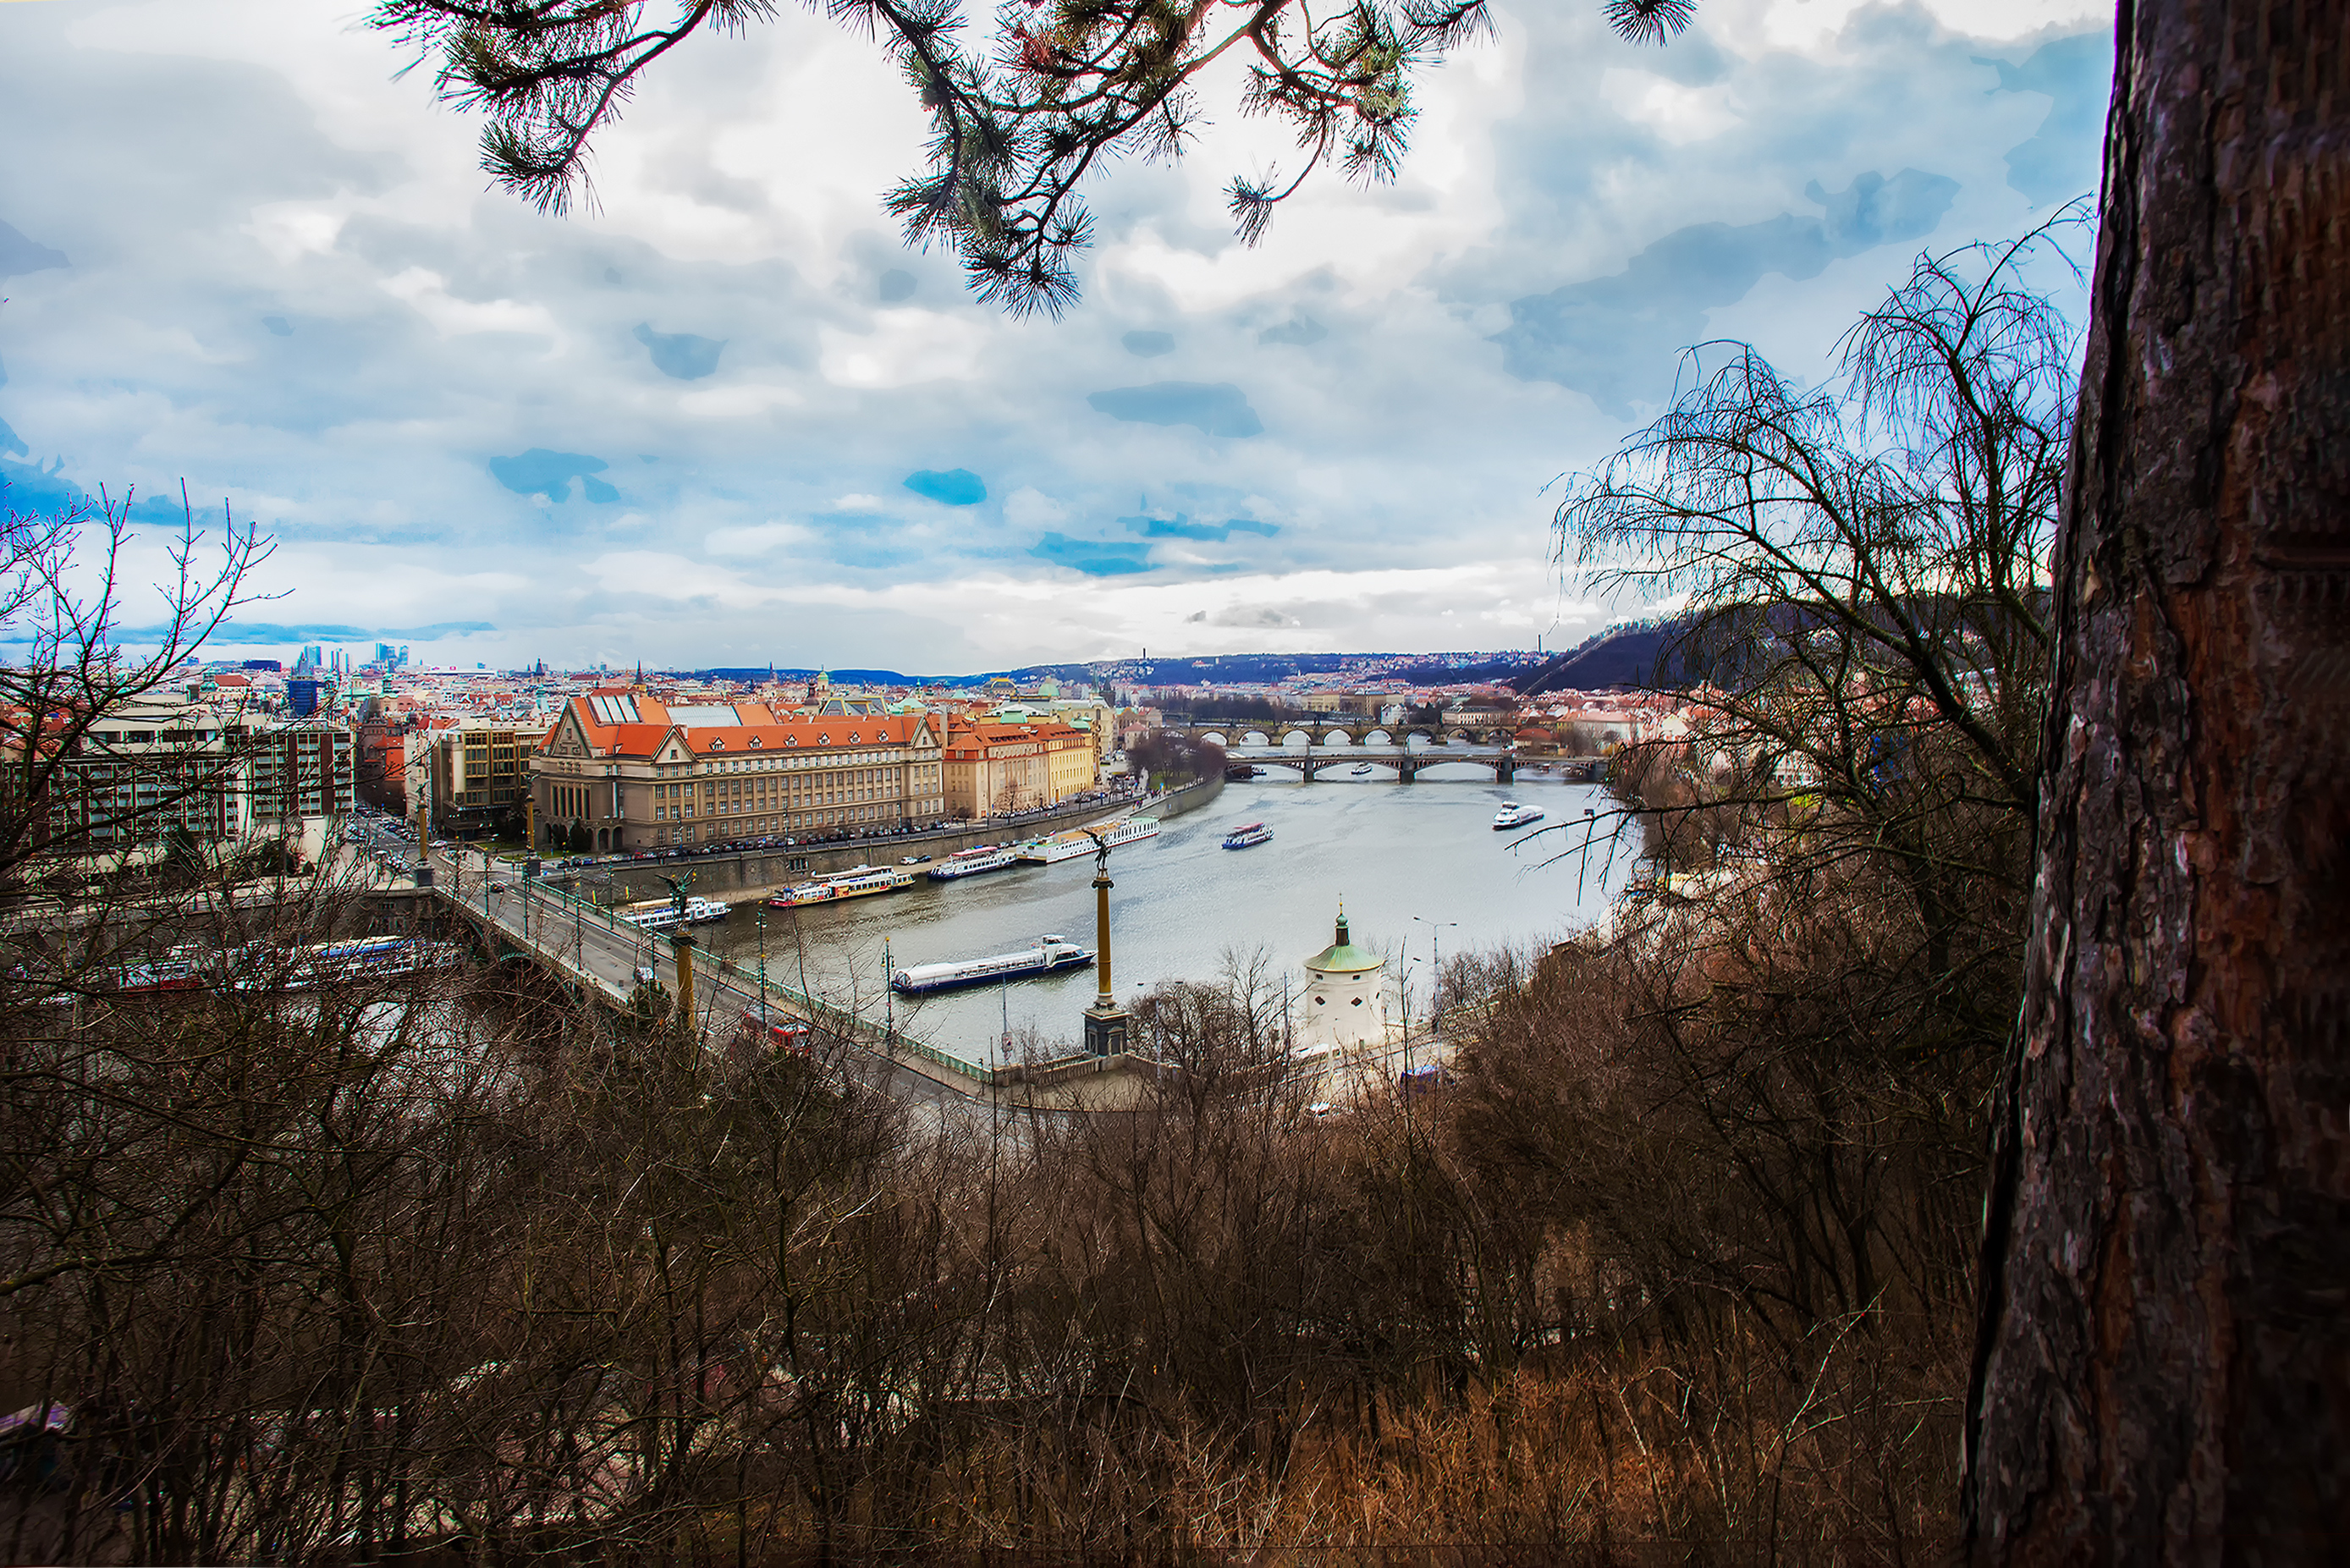 Many of Prague's parks offer excellent views of the city